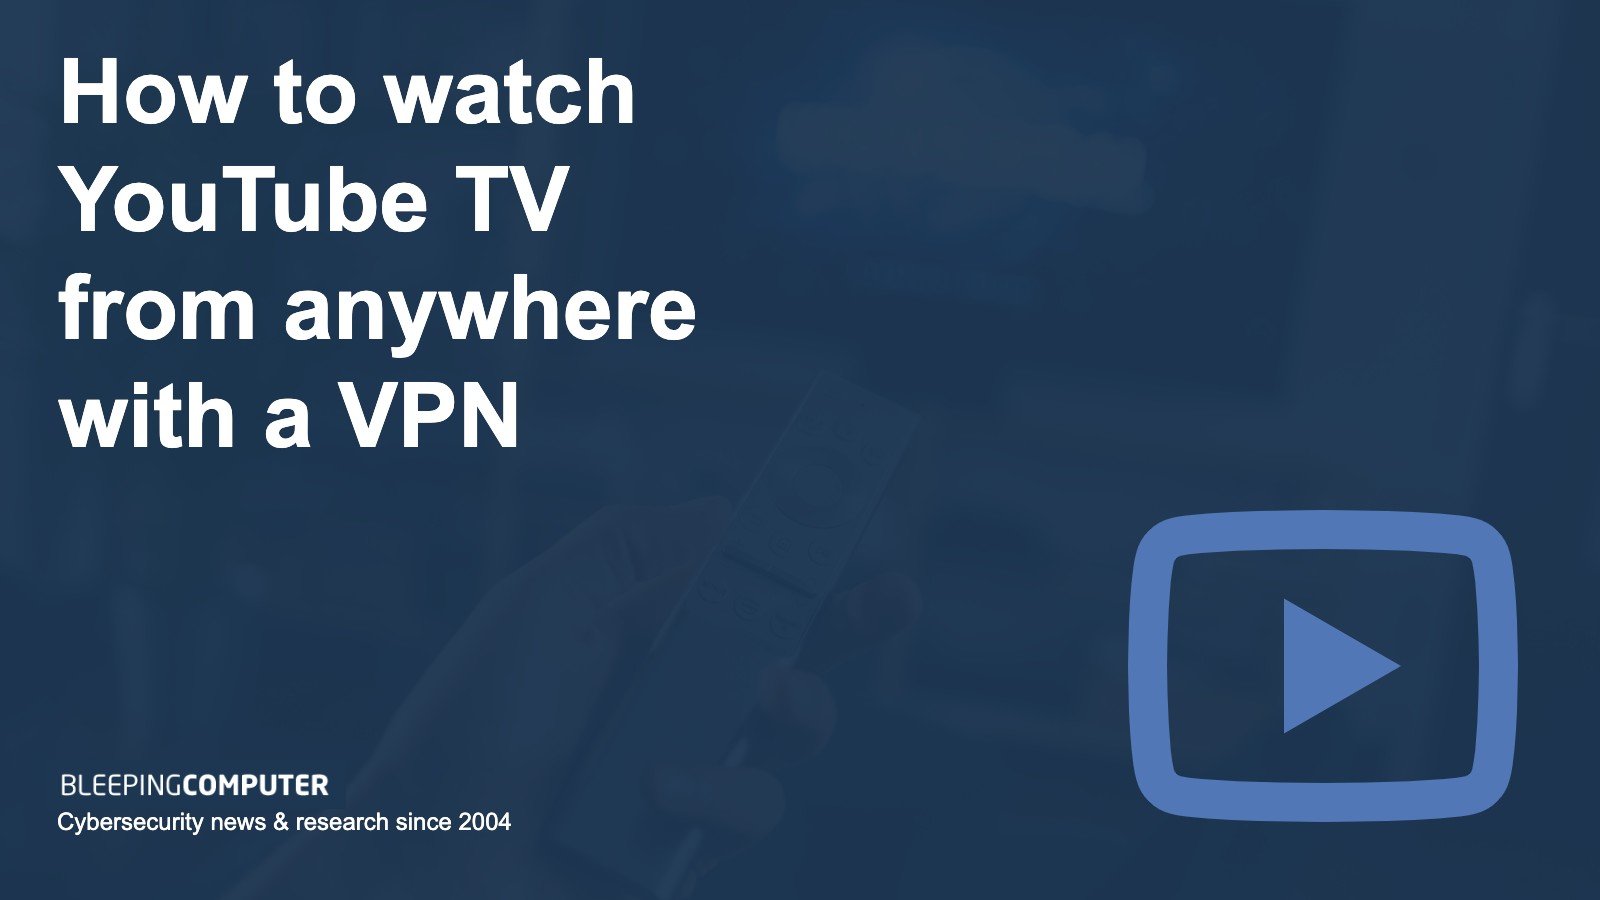 How to watch YouTube TV from anywhere with a VPN